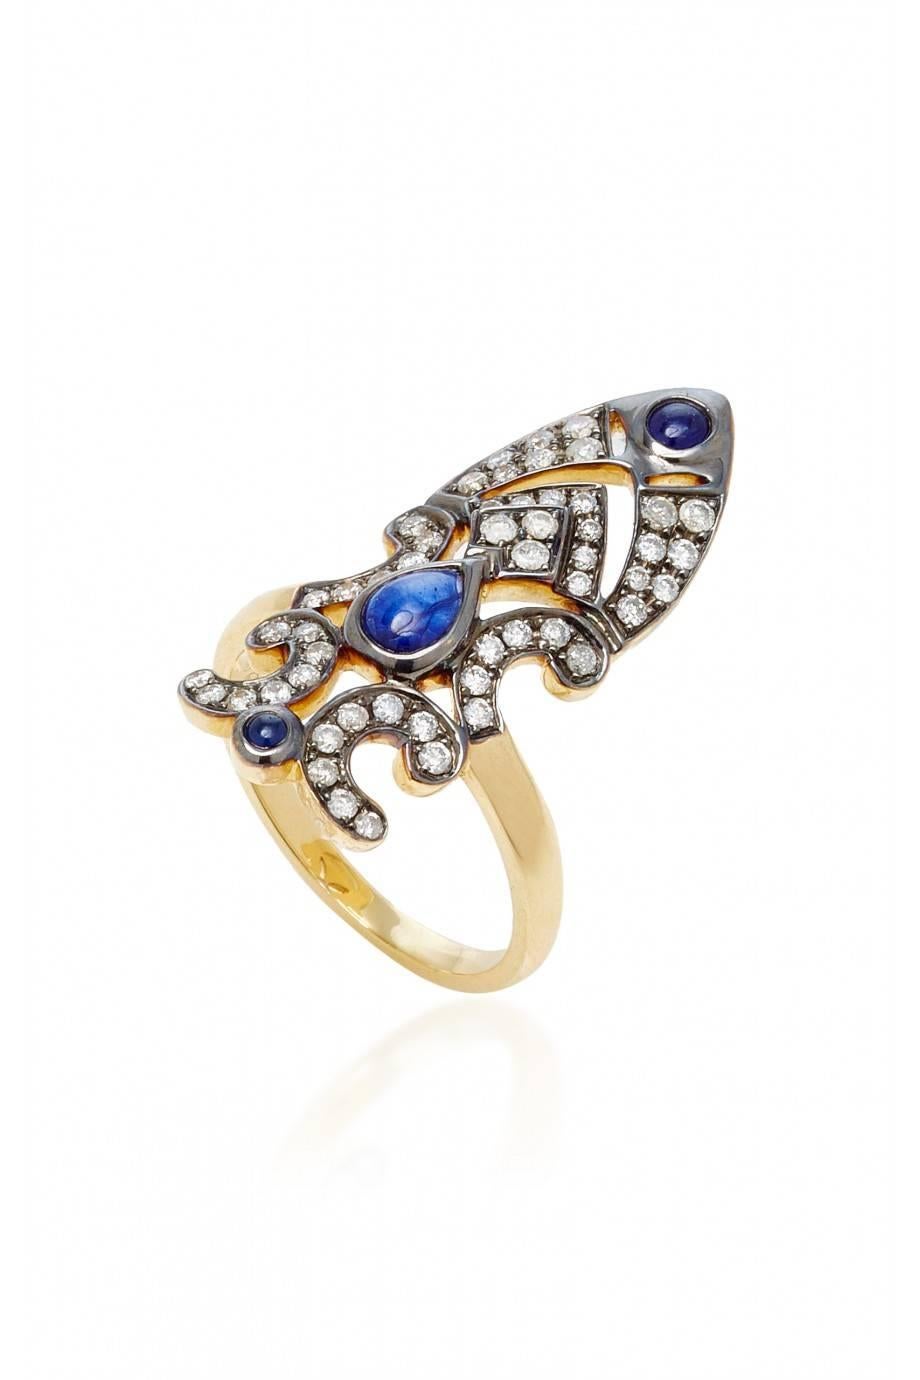 Ring in 18K Yellow gold 5gr approx.
Grey diamonds 0,45 carats approx.
Blue Sapphire 0,85 carats approx.
